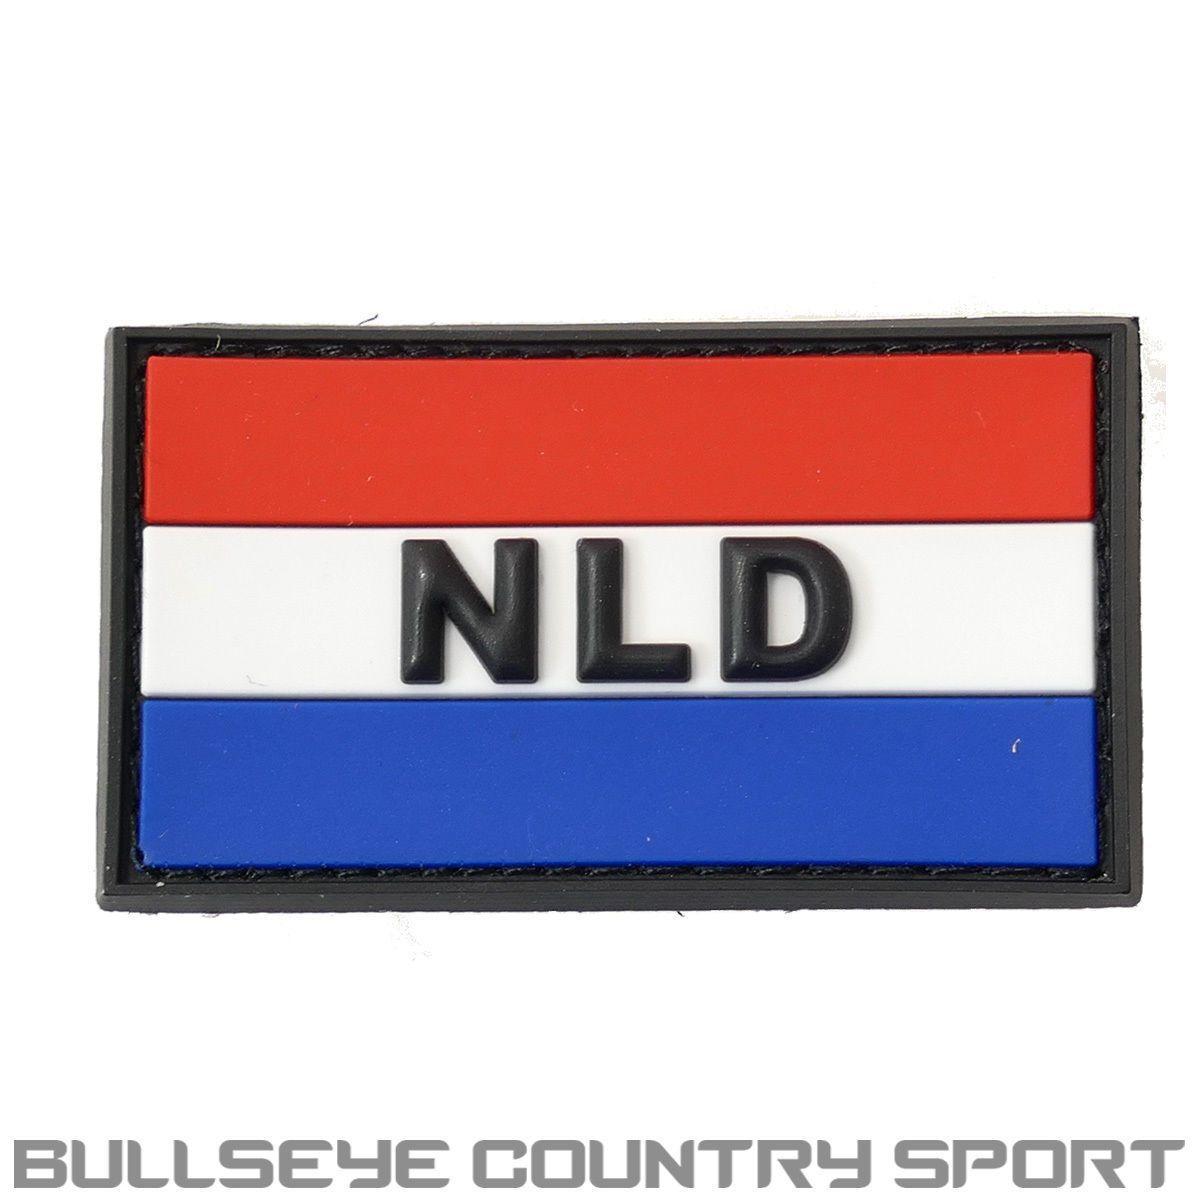 Red White and Blue Brand Logo - PVC RUBBER MORAL PATCH NETHERLANDS FLAG RED WHITE BLUE AIRSOFT VELCRO